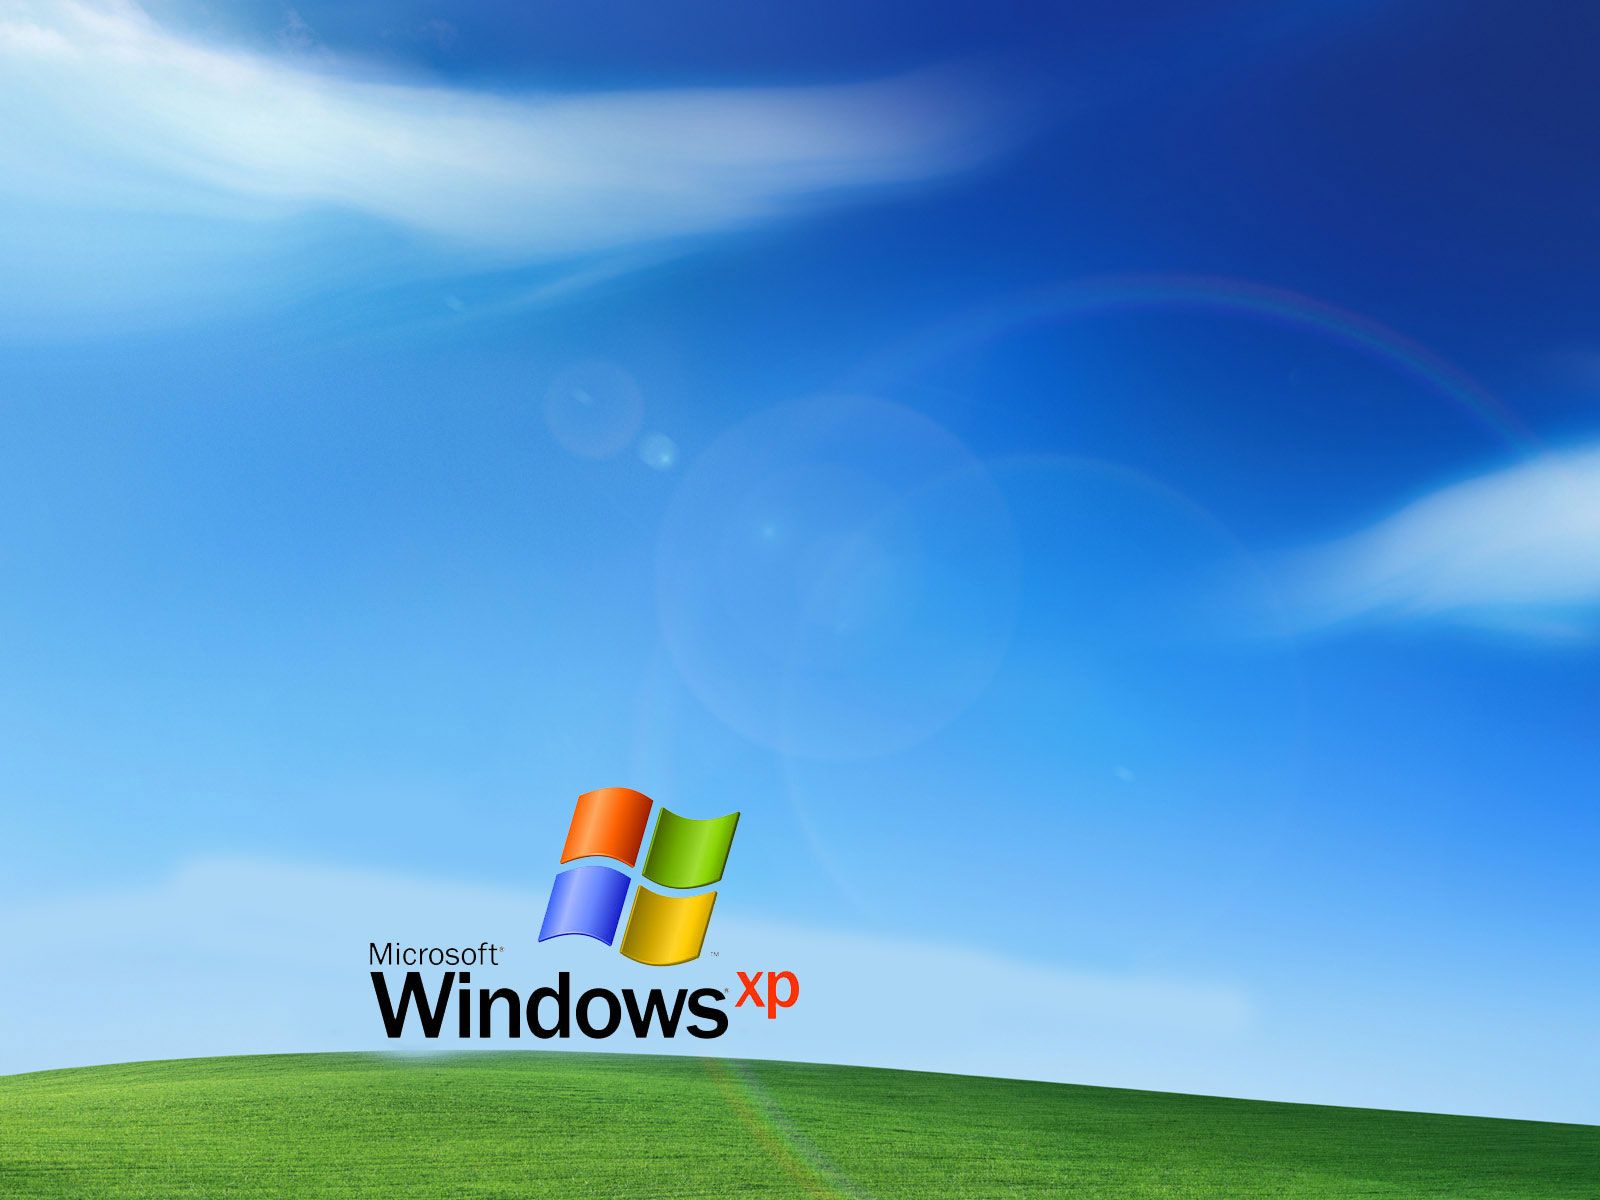 Download 45 HD Windows XP Wallpapers for Free